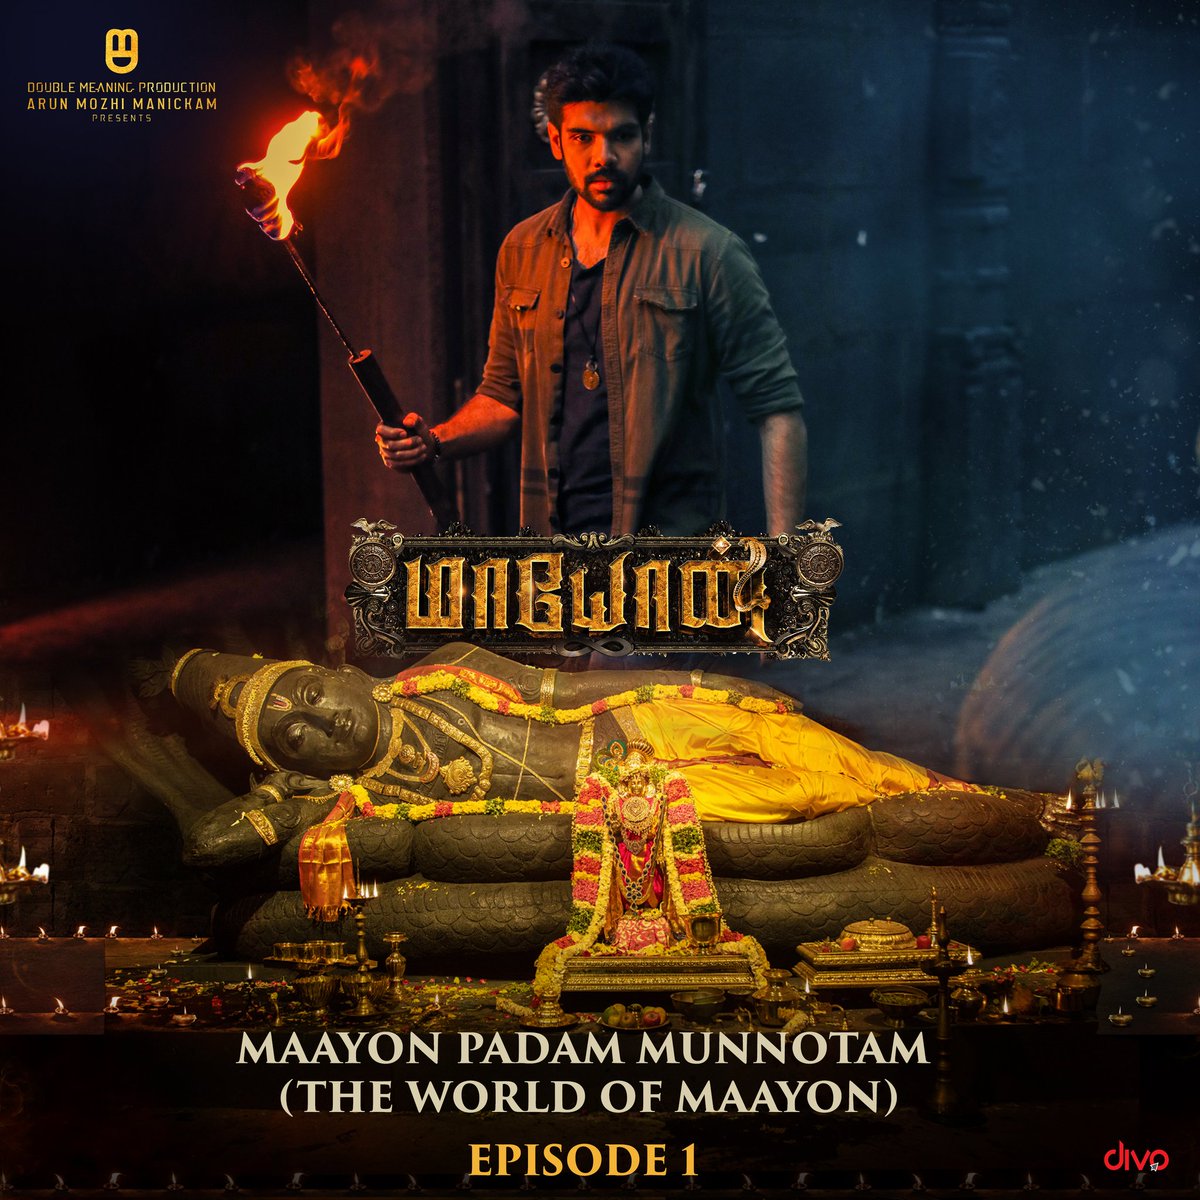 Listen to #Maayon Padam Munnotam The World of Maayon - Episode 1 on your favorite streaming platforms 🎧 Apple Music - apple.co/3Qyanfg iTunes - apple.co/3Qyanfg Resso - m.resso.com/Zs8F4tqqh/ Amazon Music - amzn.to/45a8Q3O YouTube Music -